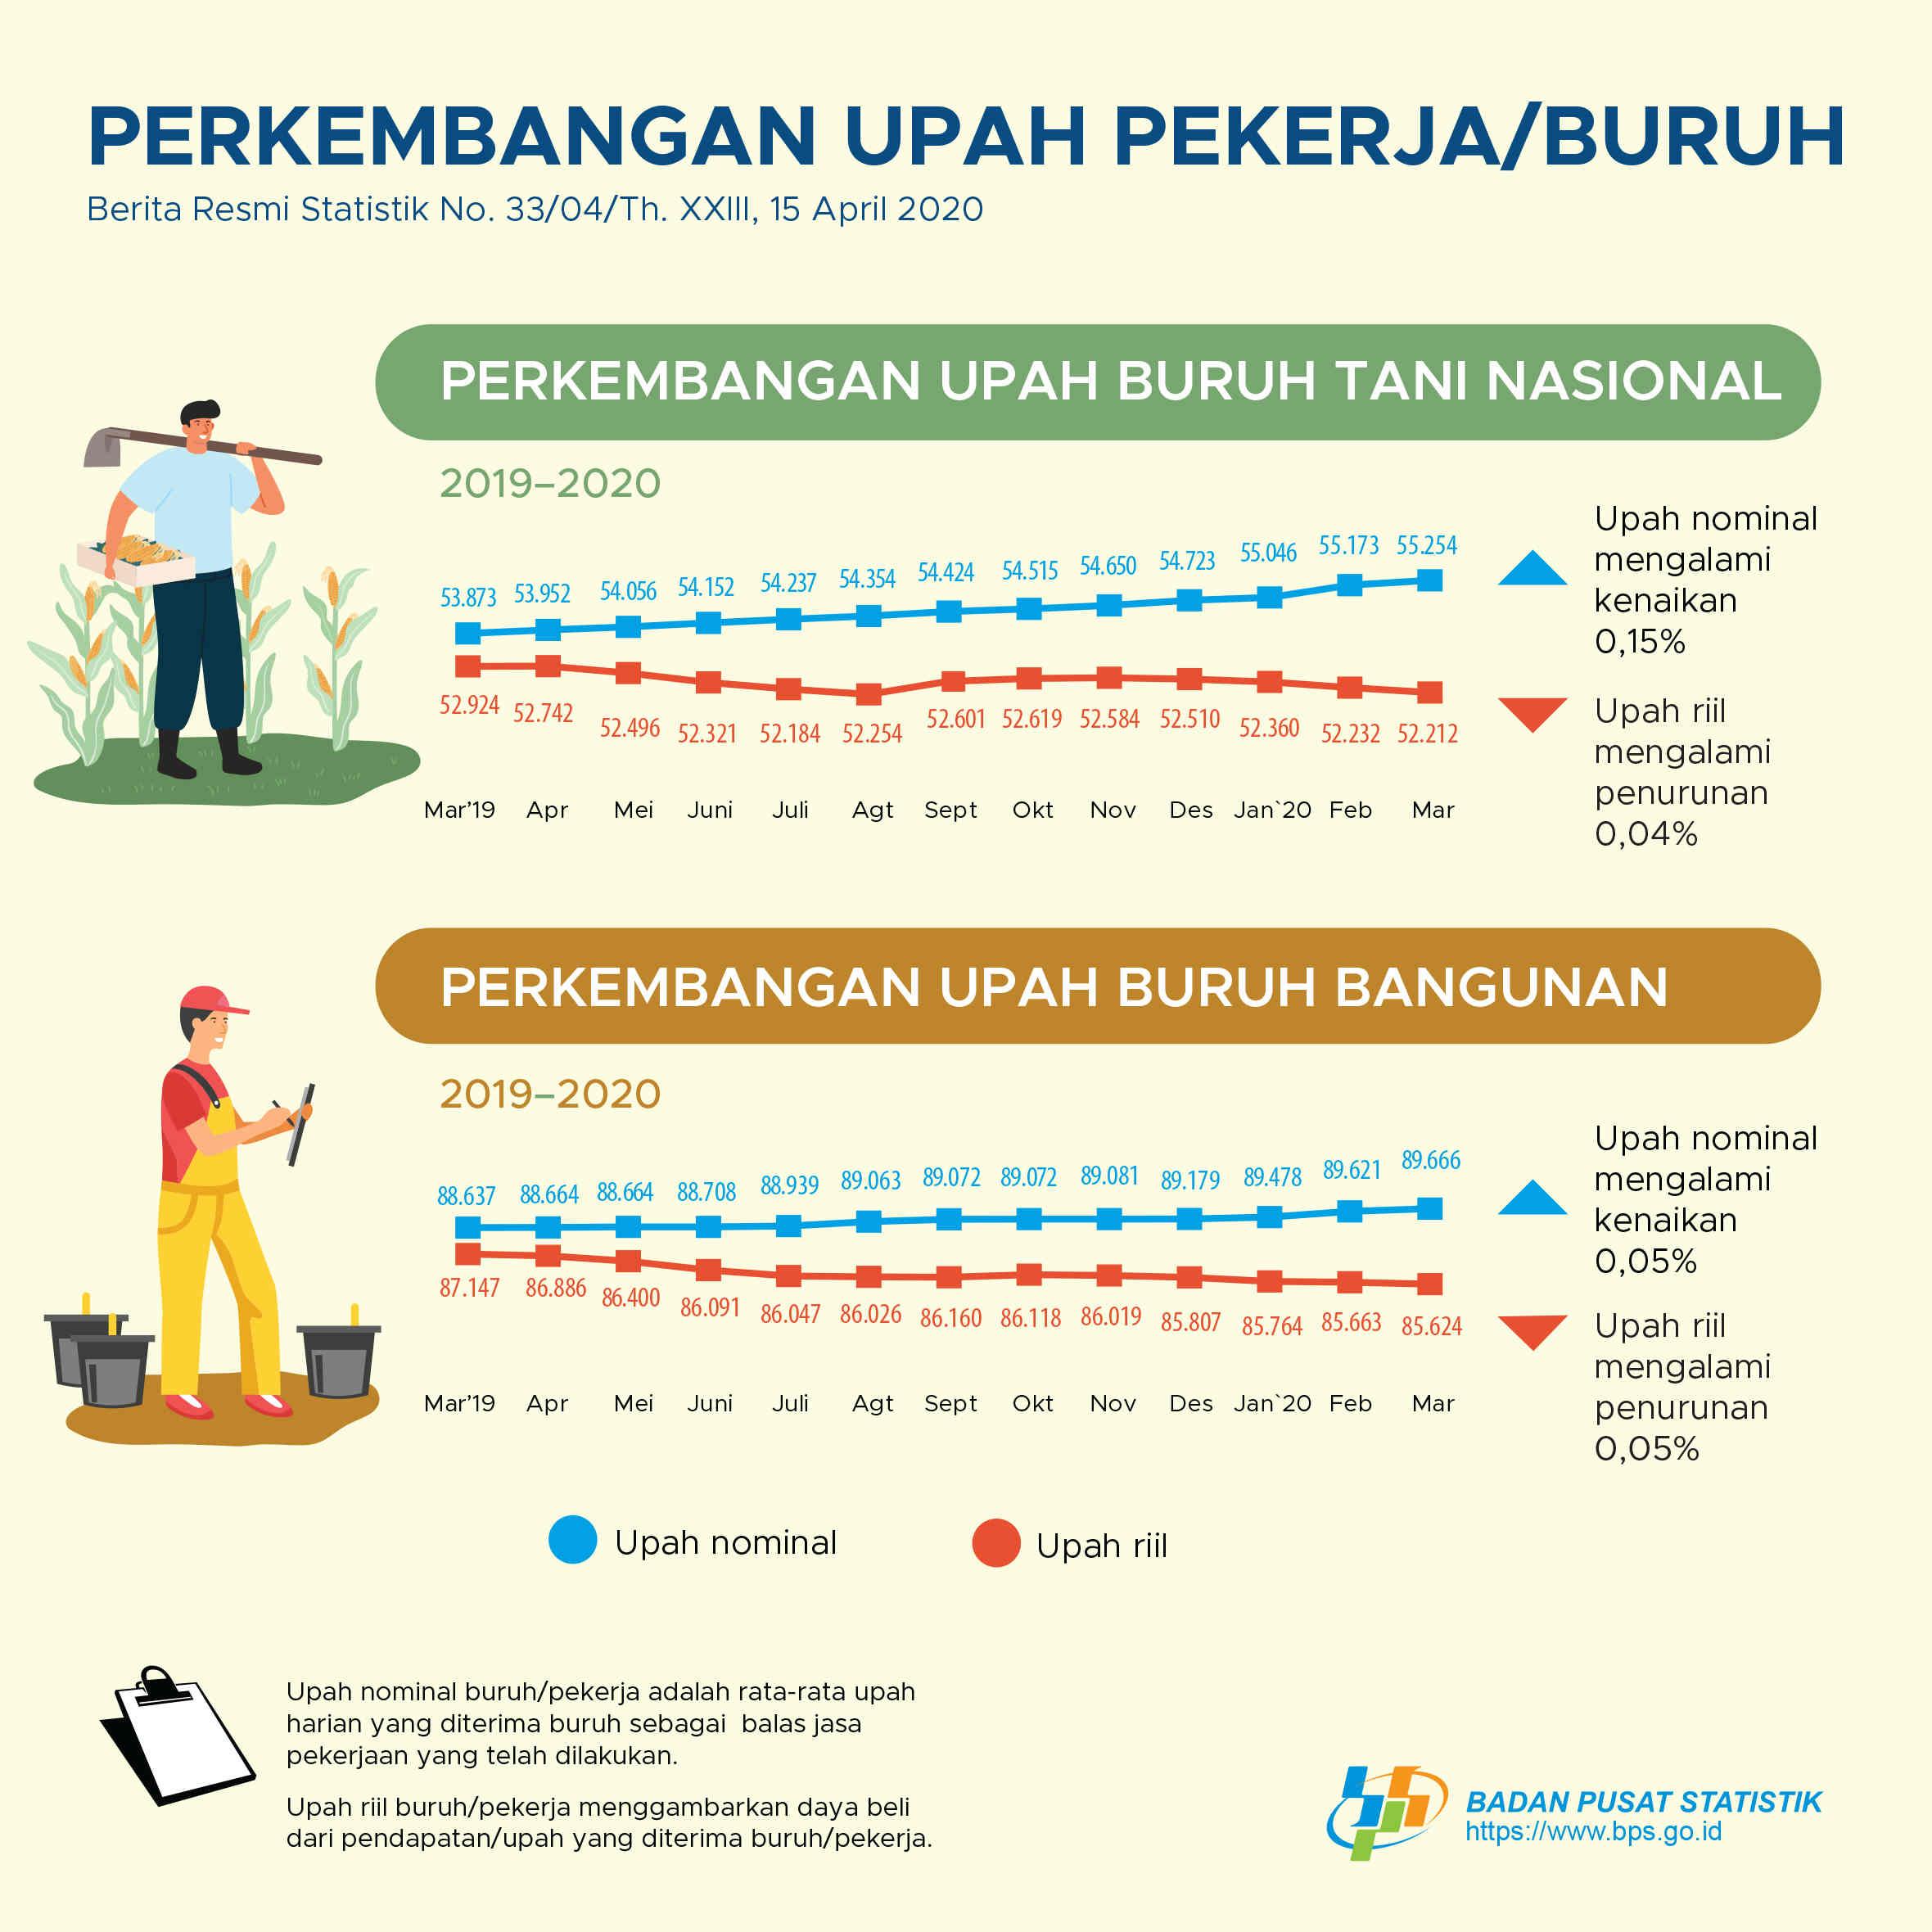 The Nominal Wage for the National Farmers Day in March 2020 Increases by 0.15 Percent